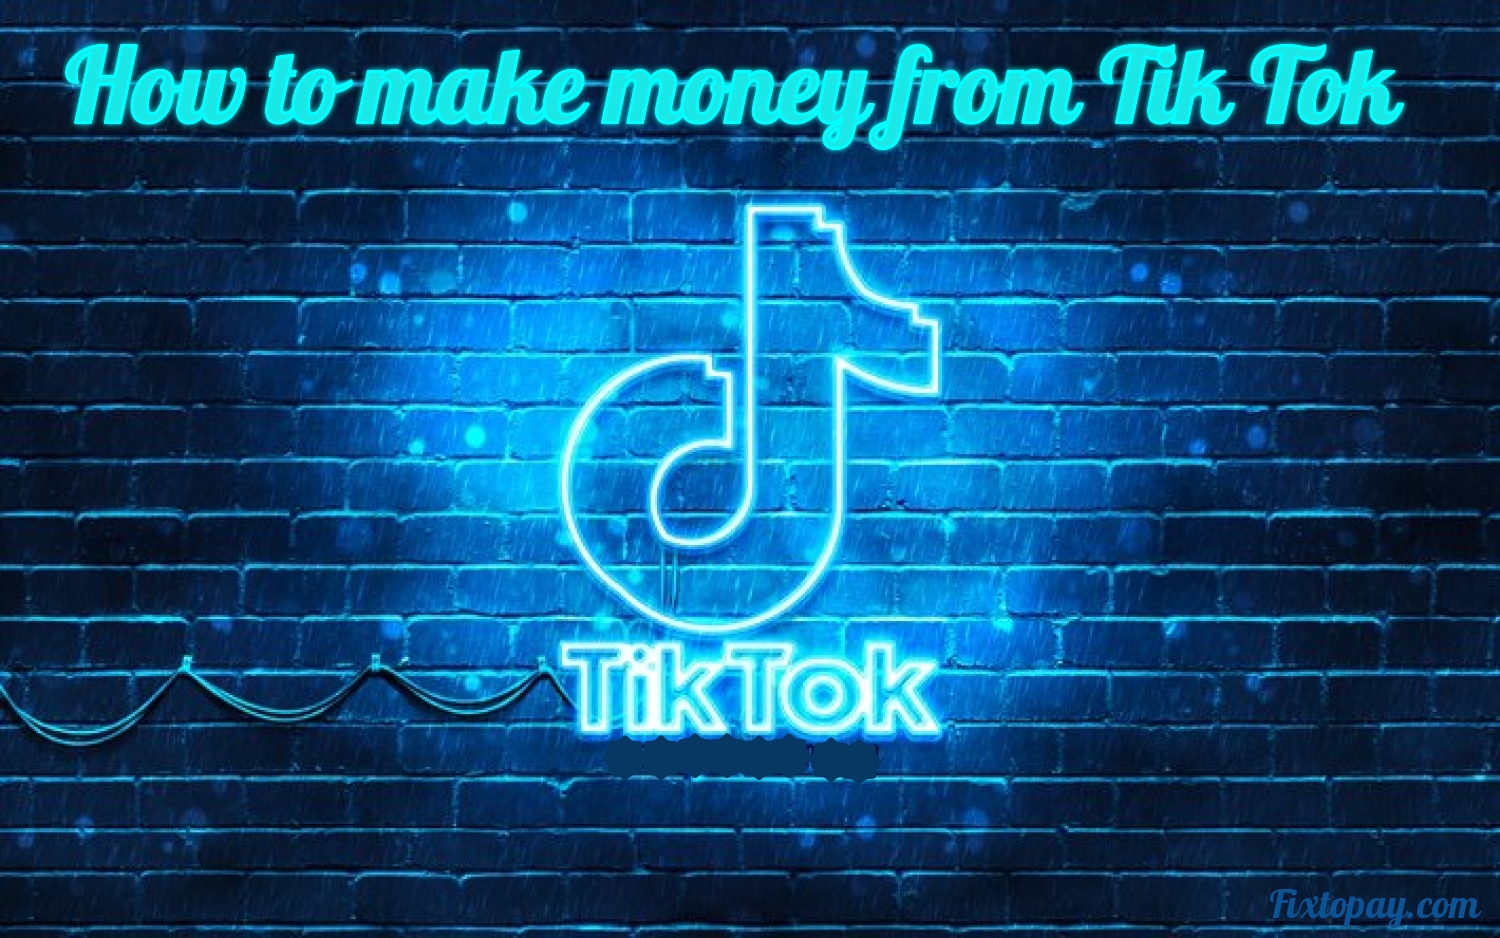 How to make money from Tik Tok